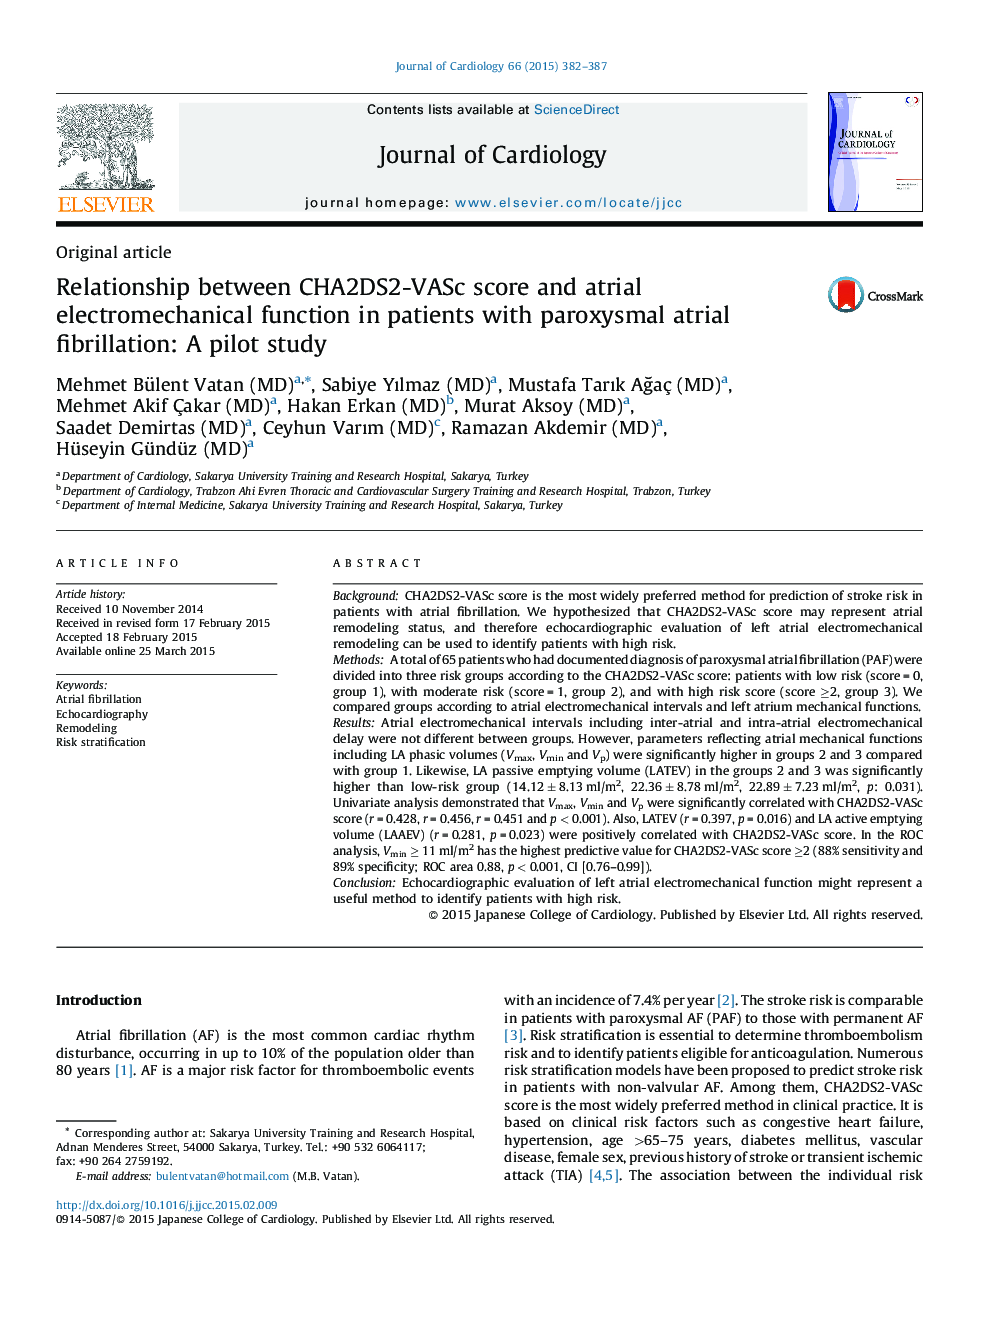 Relationship between CHA2DS2-VASc score and atrial electromechanical function in patients with paroxysmal atrial fibrillation: A pilot study